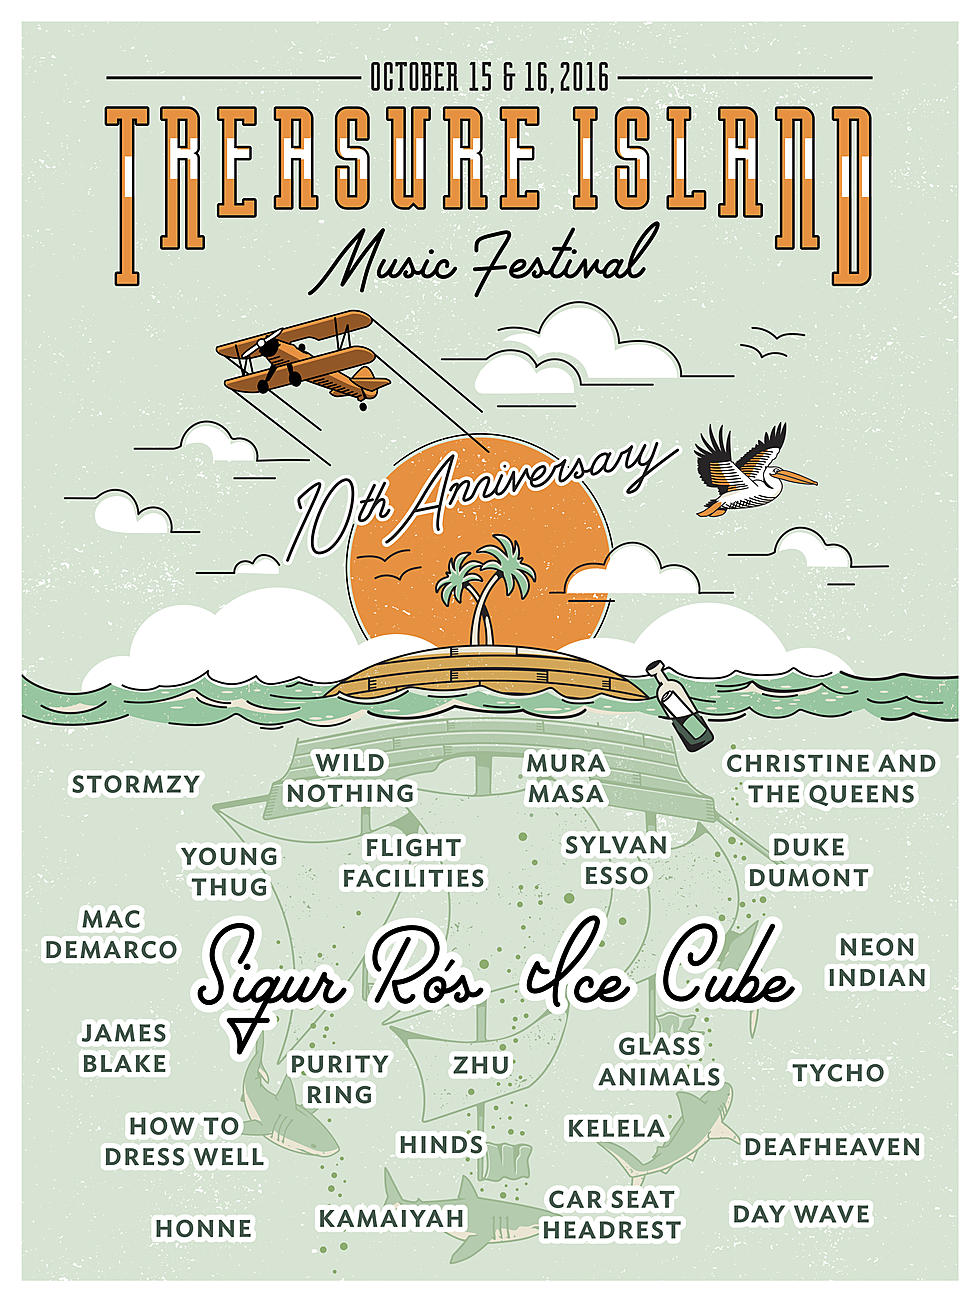 TREASURE ISLAND Announces Lineup for 10th Annual Event Oct. 15 & 16 in San Francisco